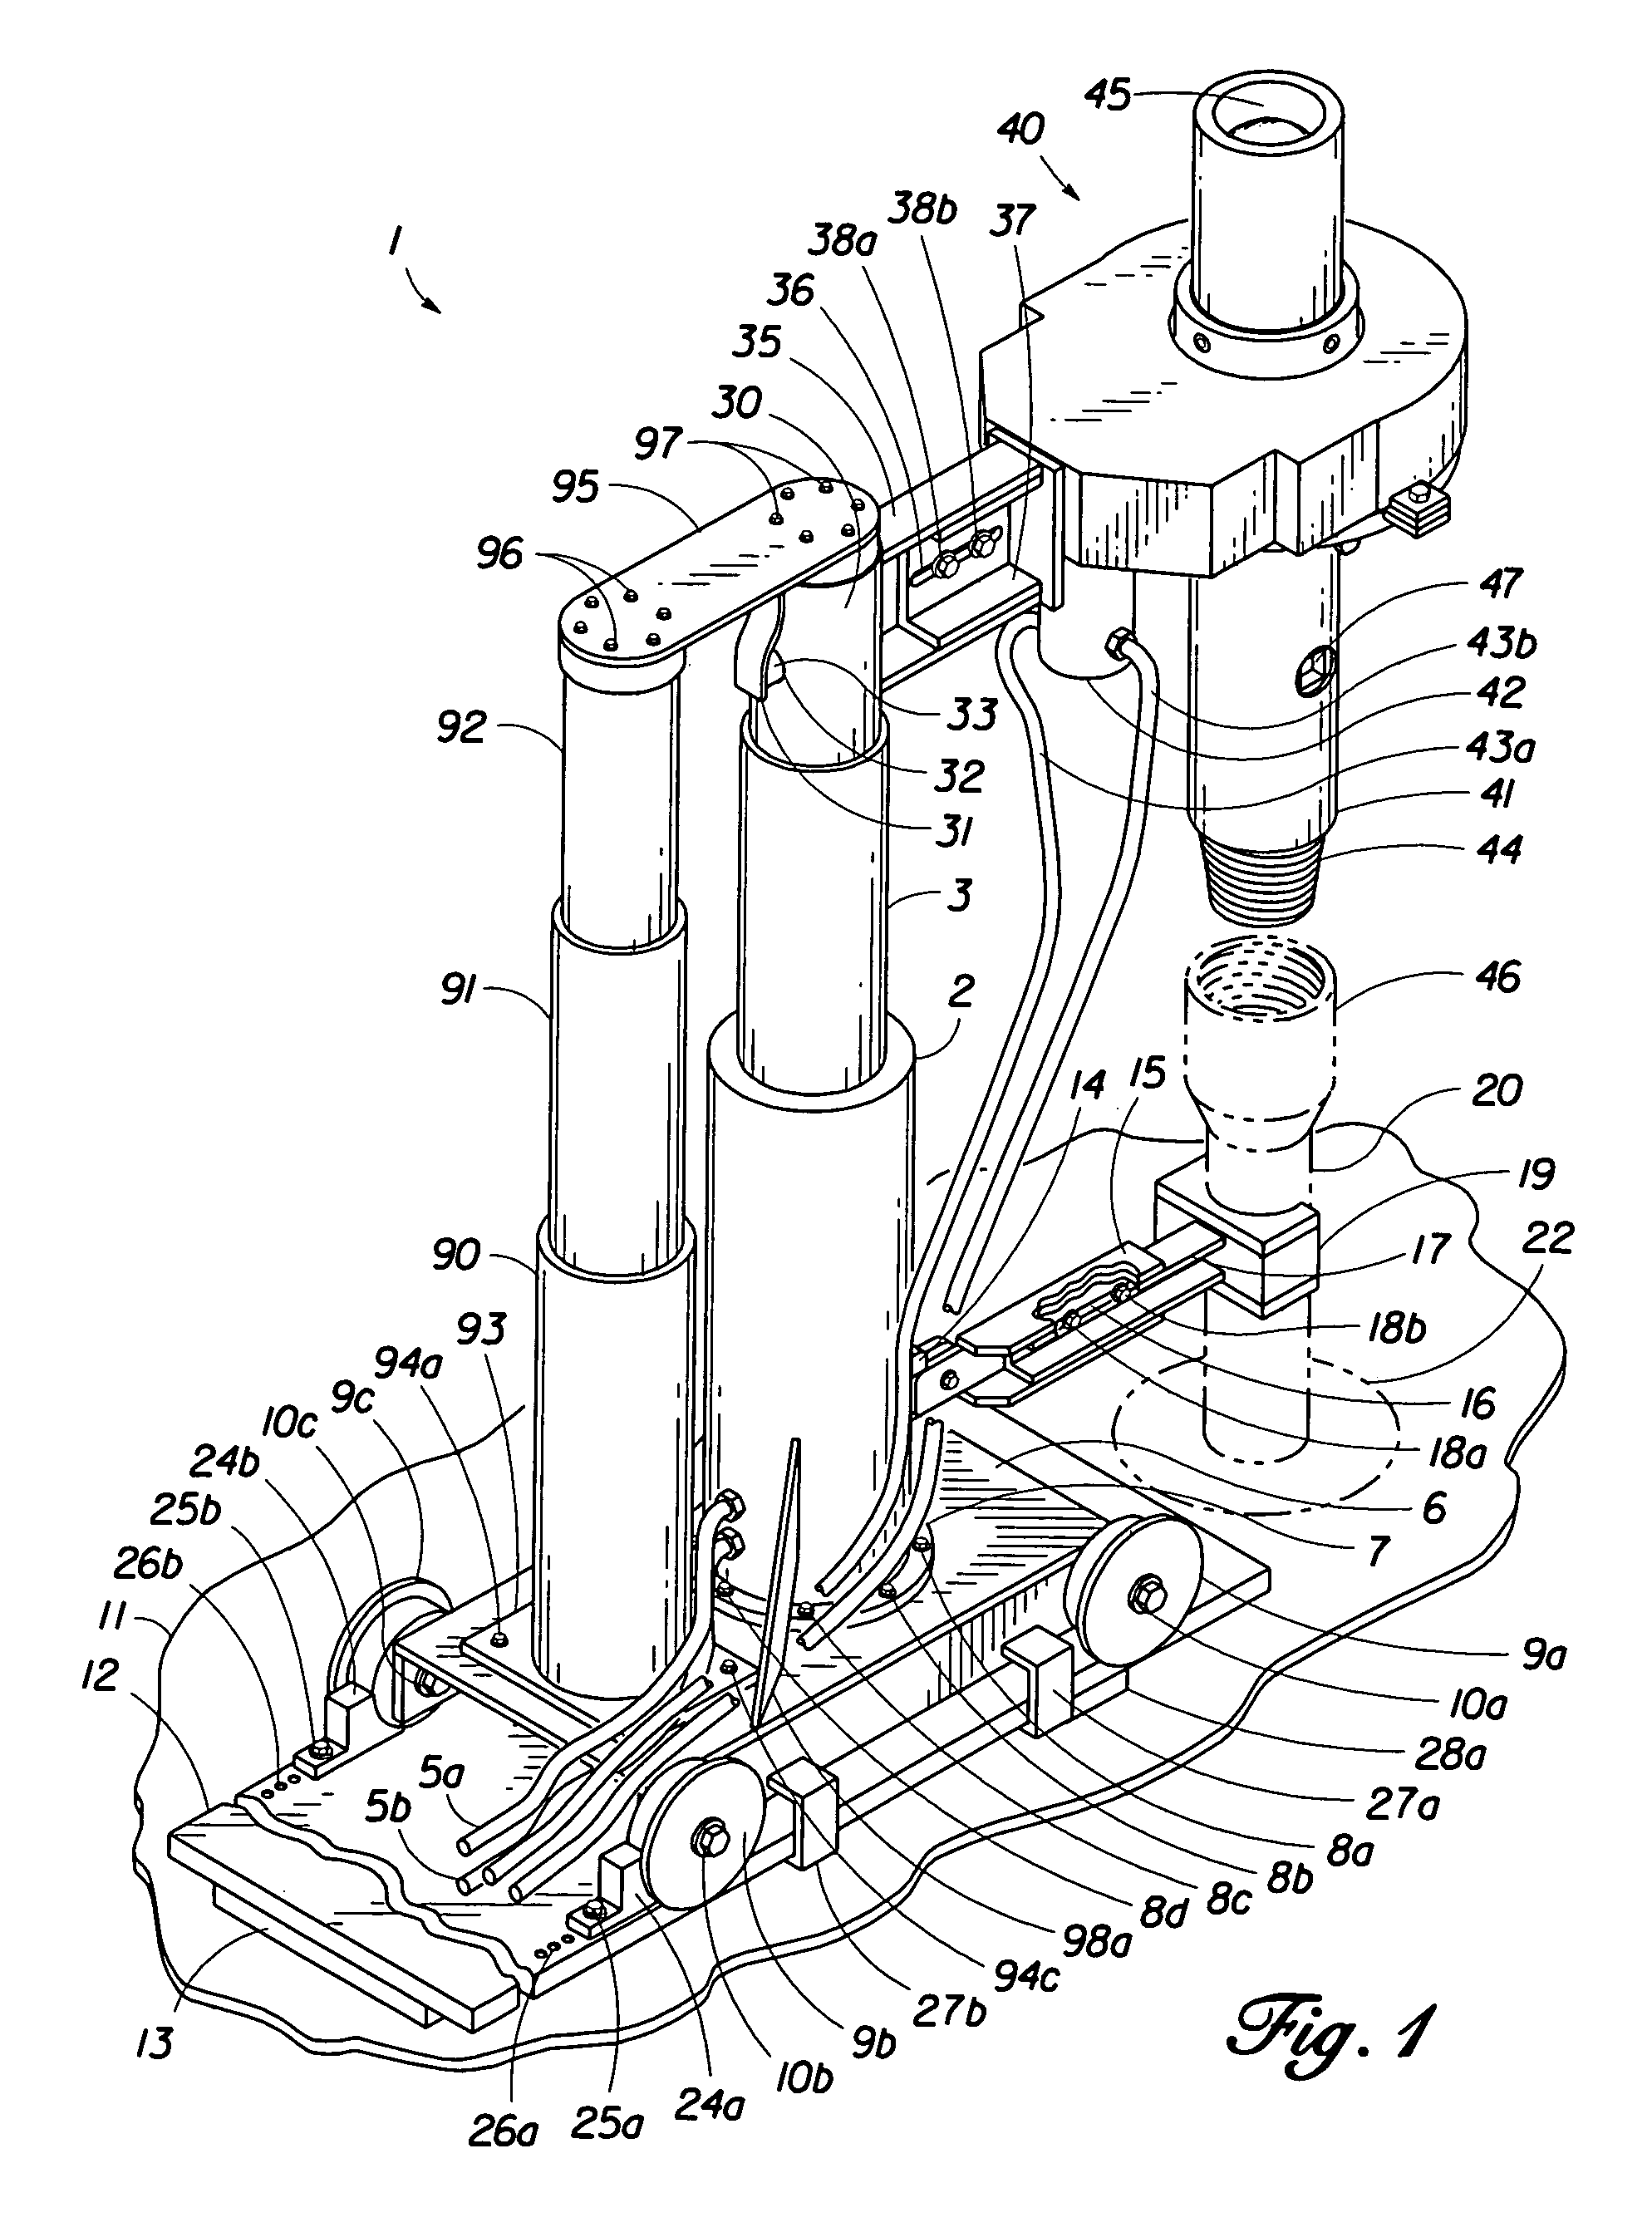 Hydraulic flow control system with an internal compensator sleeve